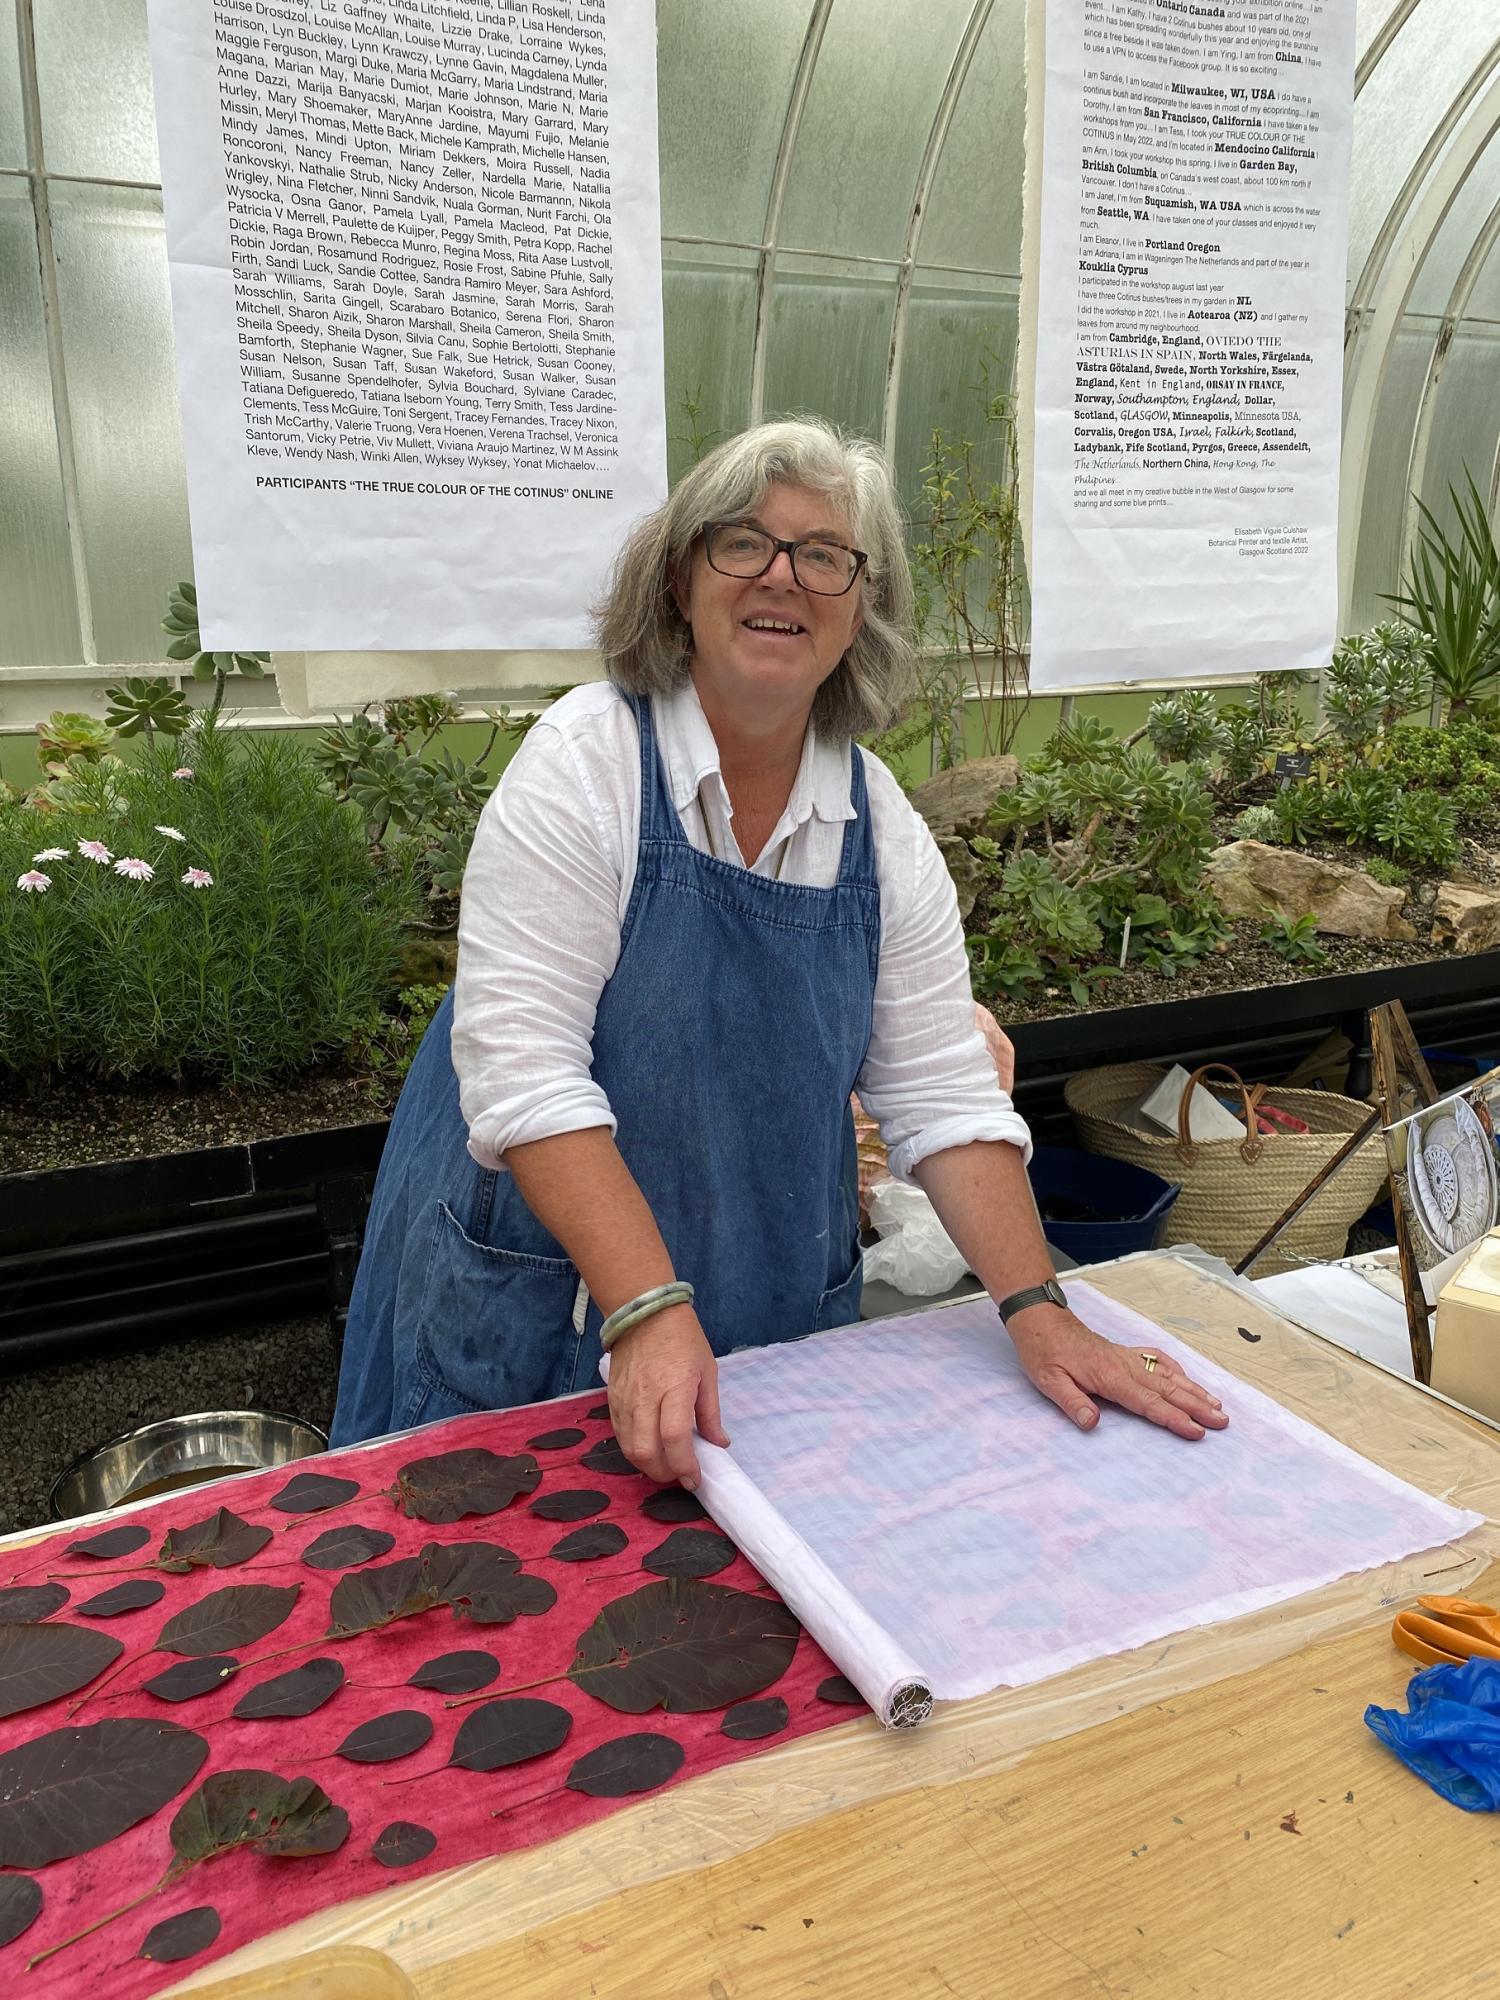 Elisabeth is pictured at Glasgow Botanic Gardens. She will be exhibiting the piece being made in Kirkintilloch.